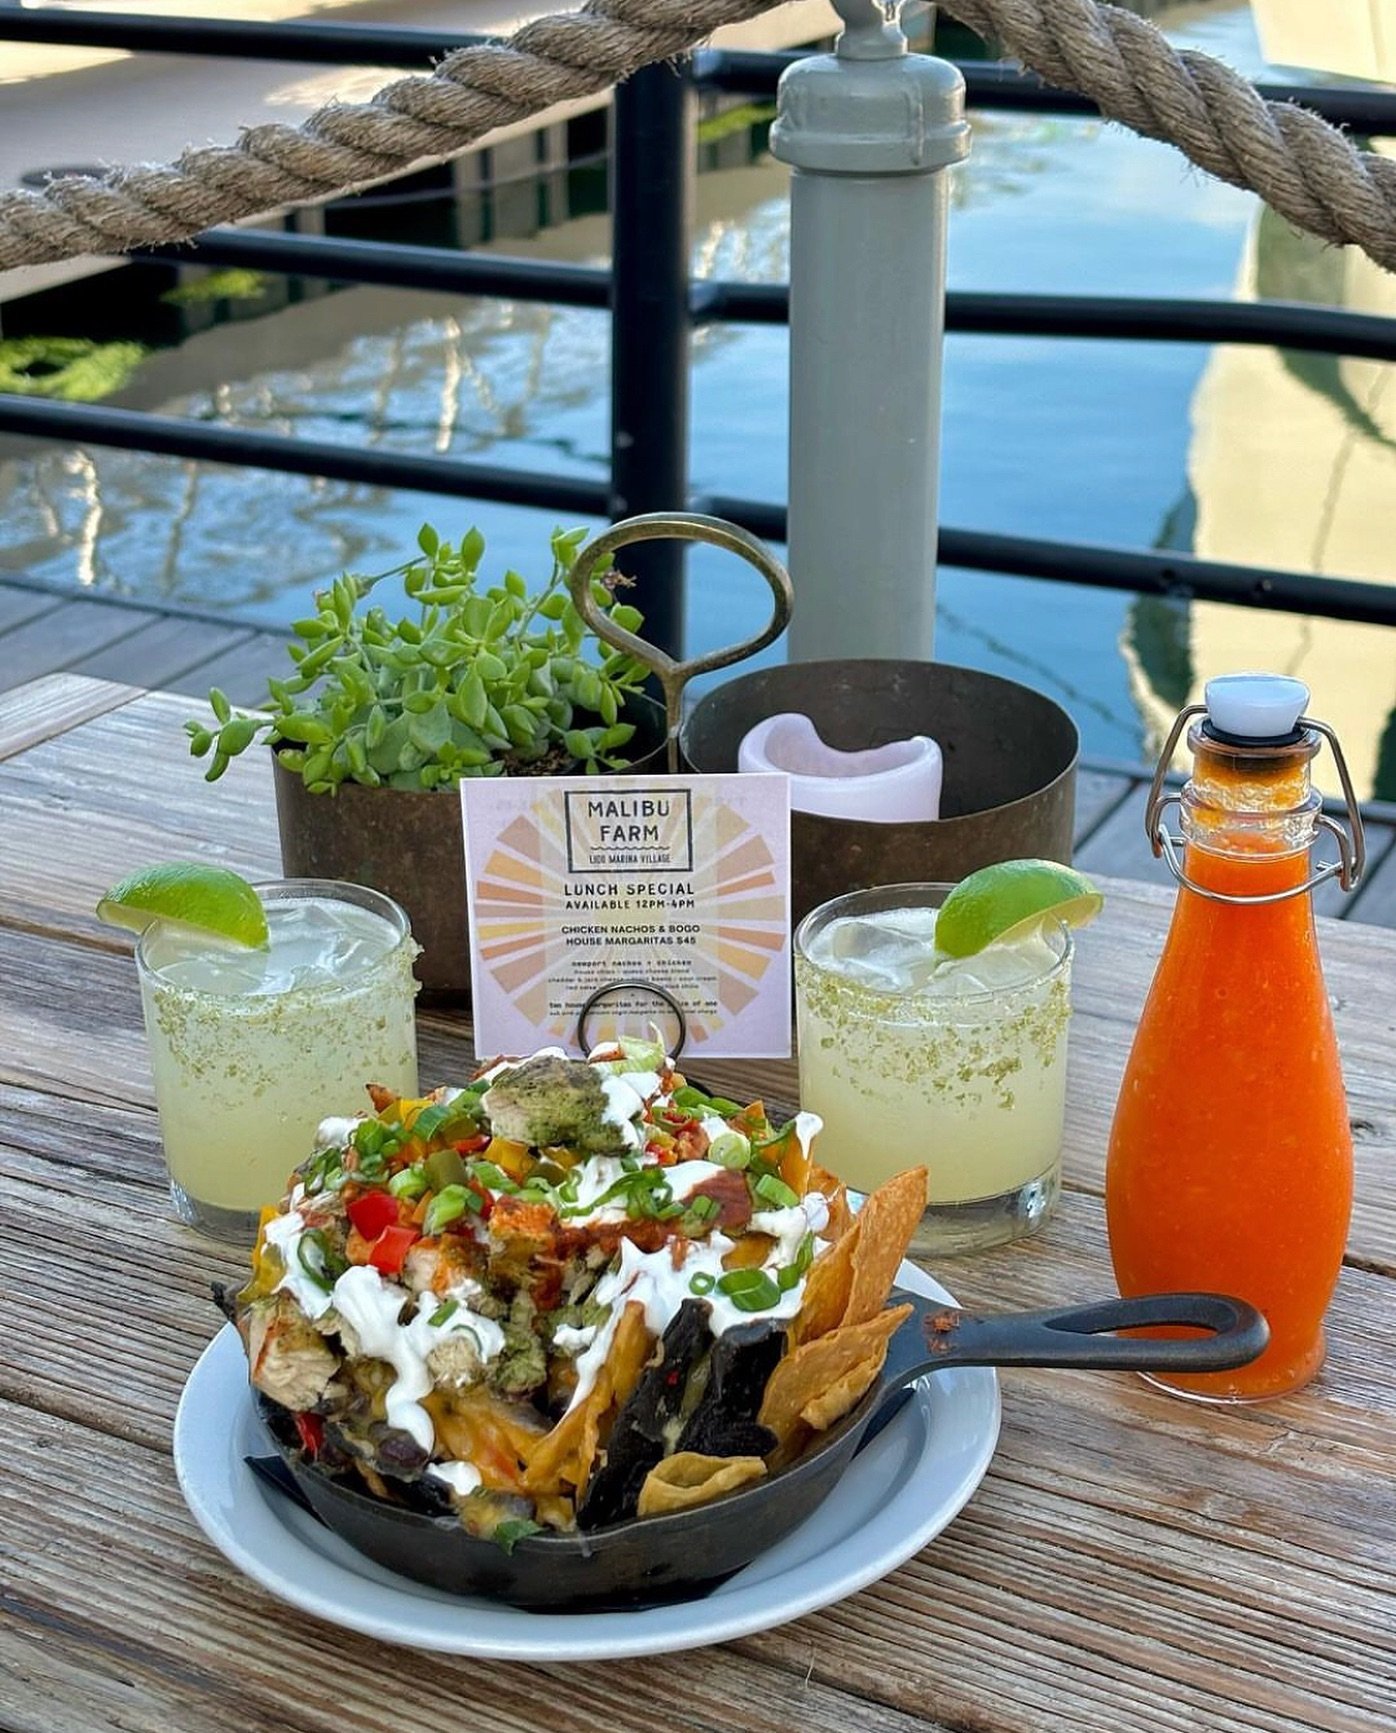 Scoop up Newport Nachos Lunch Special from @malibufarmlido and enjoy two margaritas for the price of one! #LidoMarinaVillage